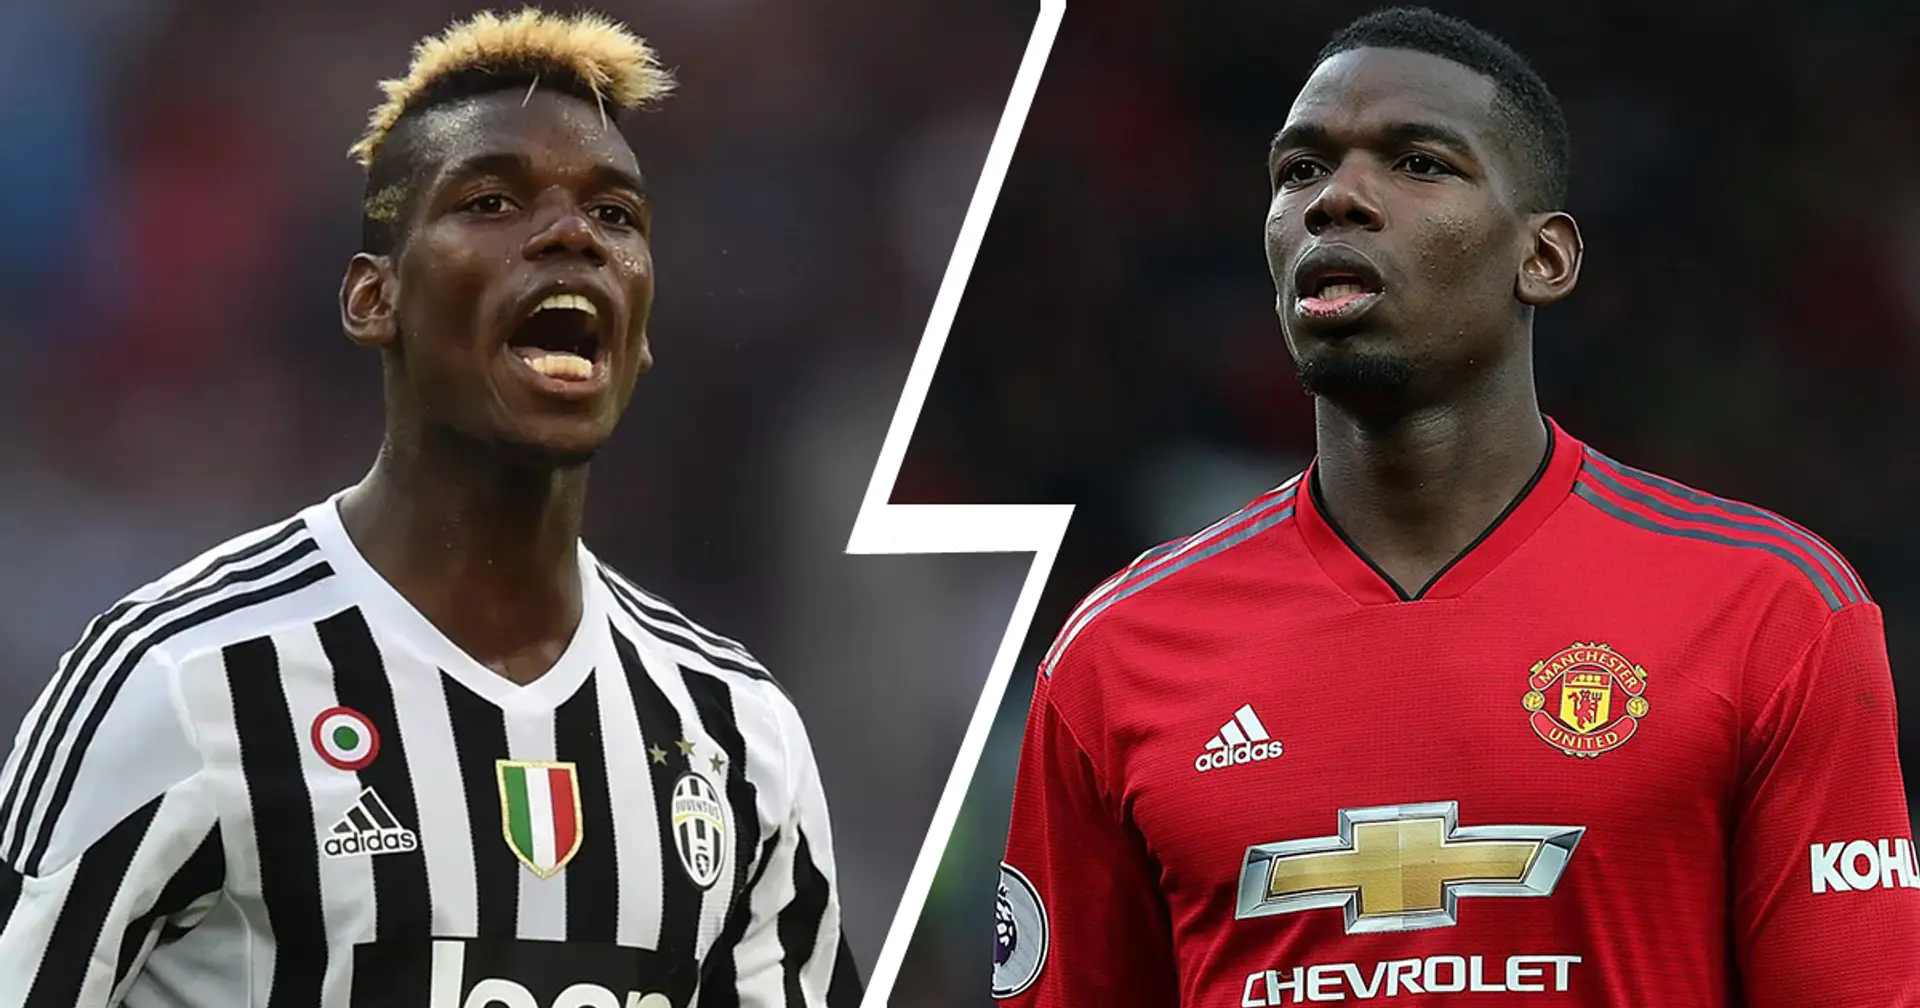 Juventus have 'clear stance' on Pogba: they want him back